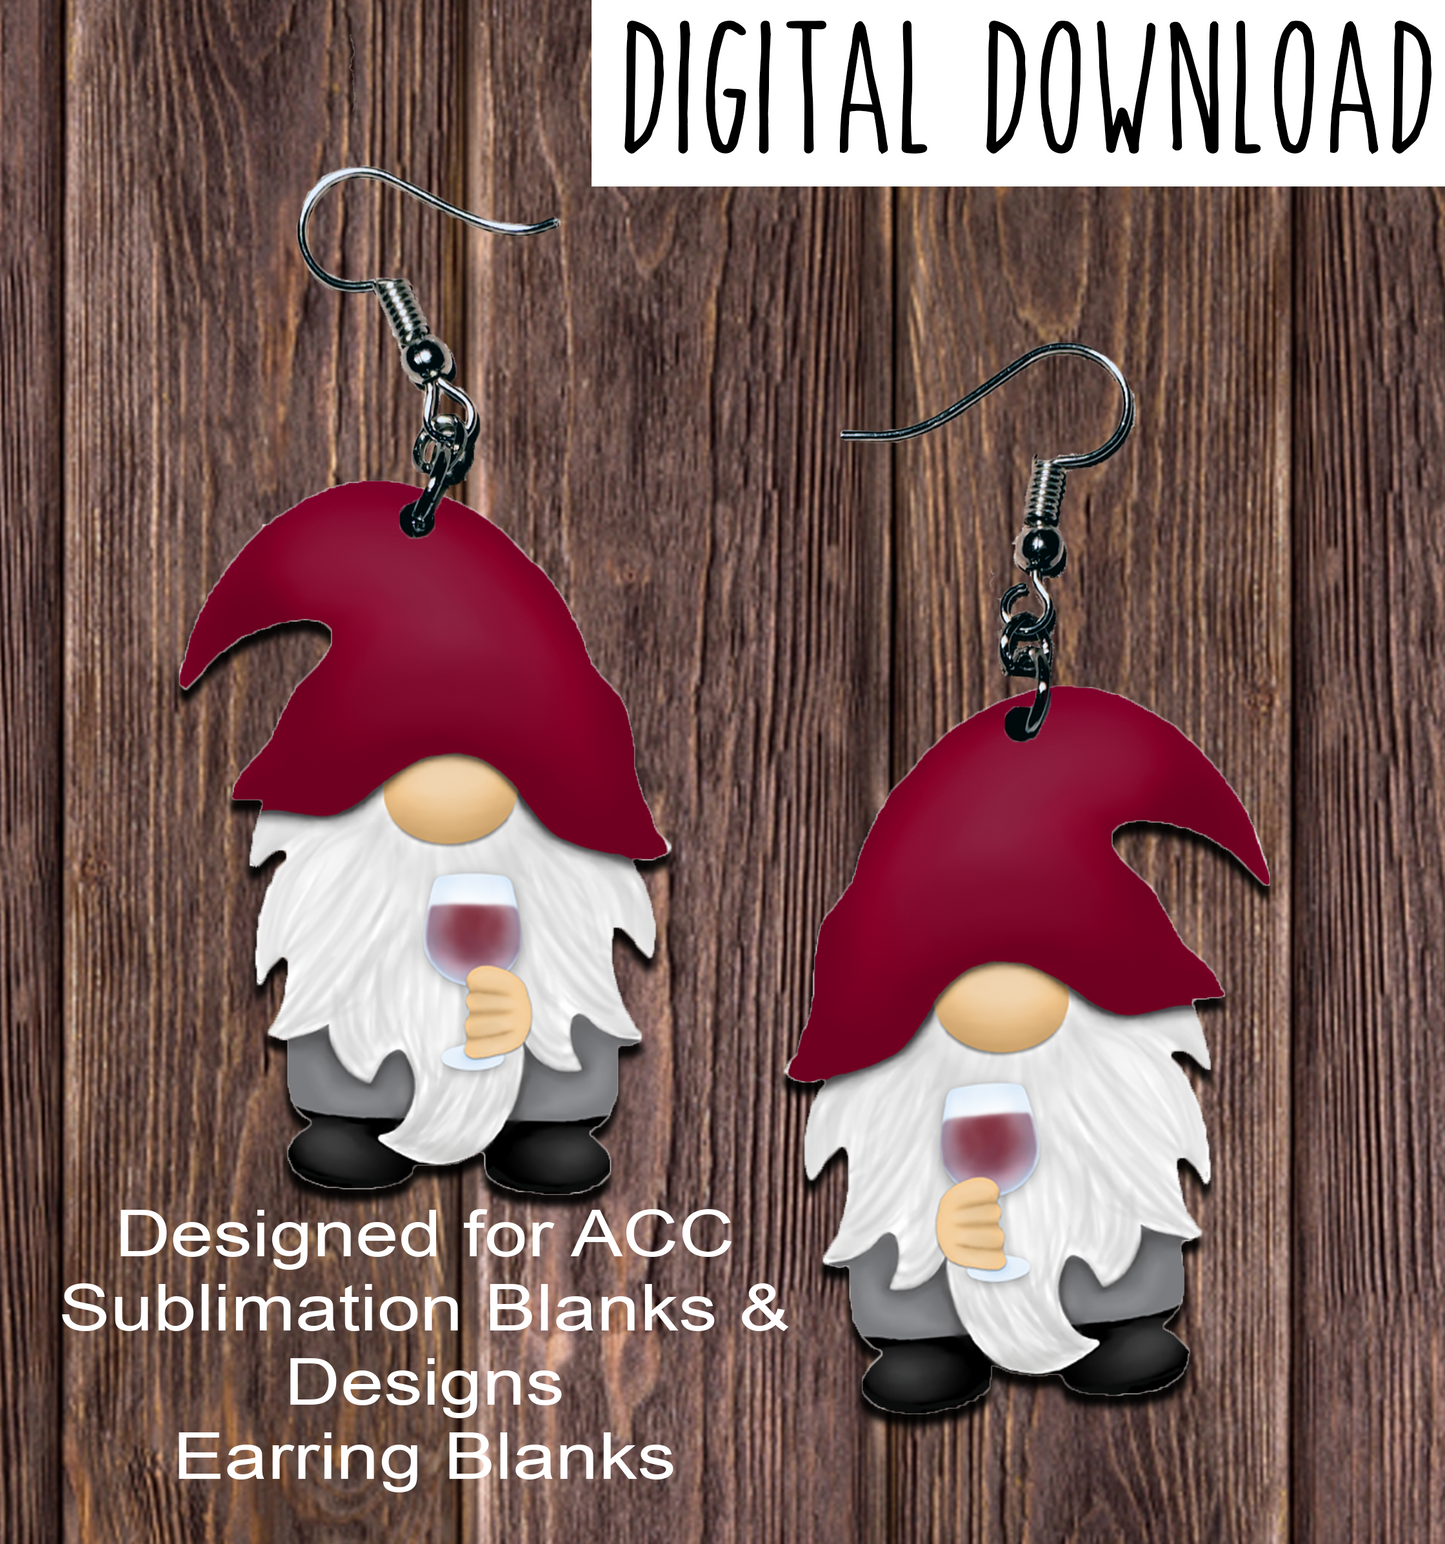 Red Wine Gnome Earring Sublimation Design, Hand drawn Gnome Sublimation earring design, digital download, JPG, PNG